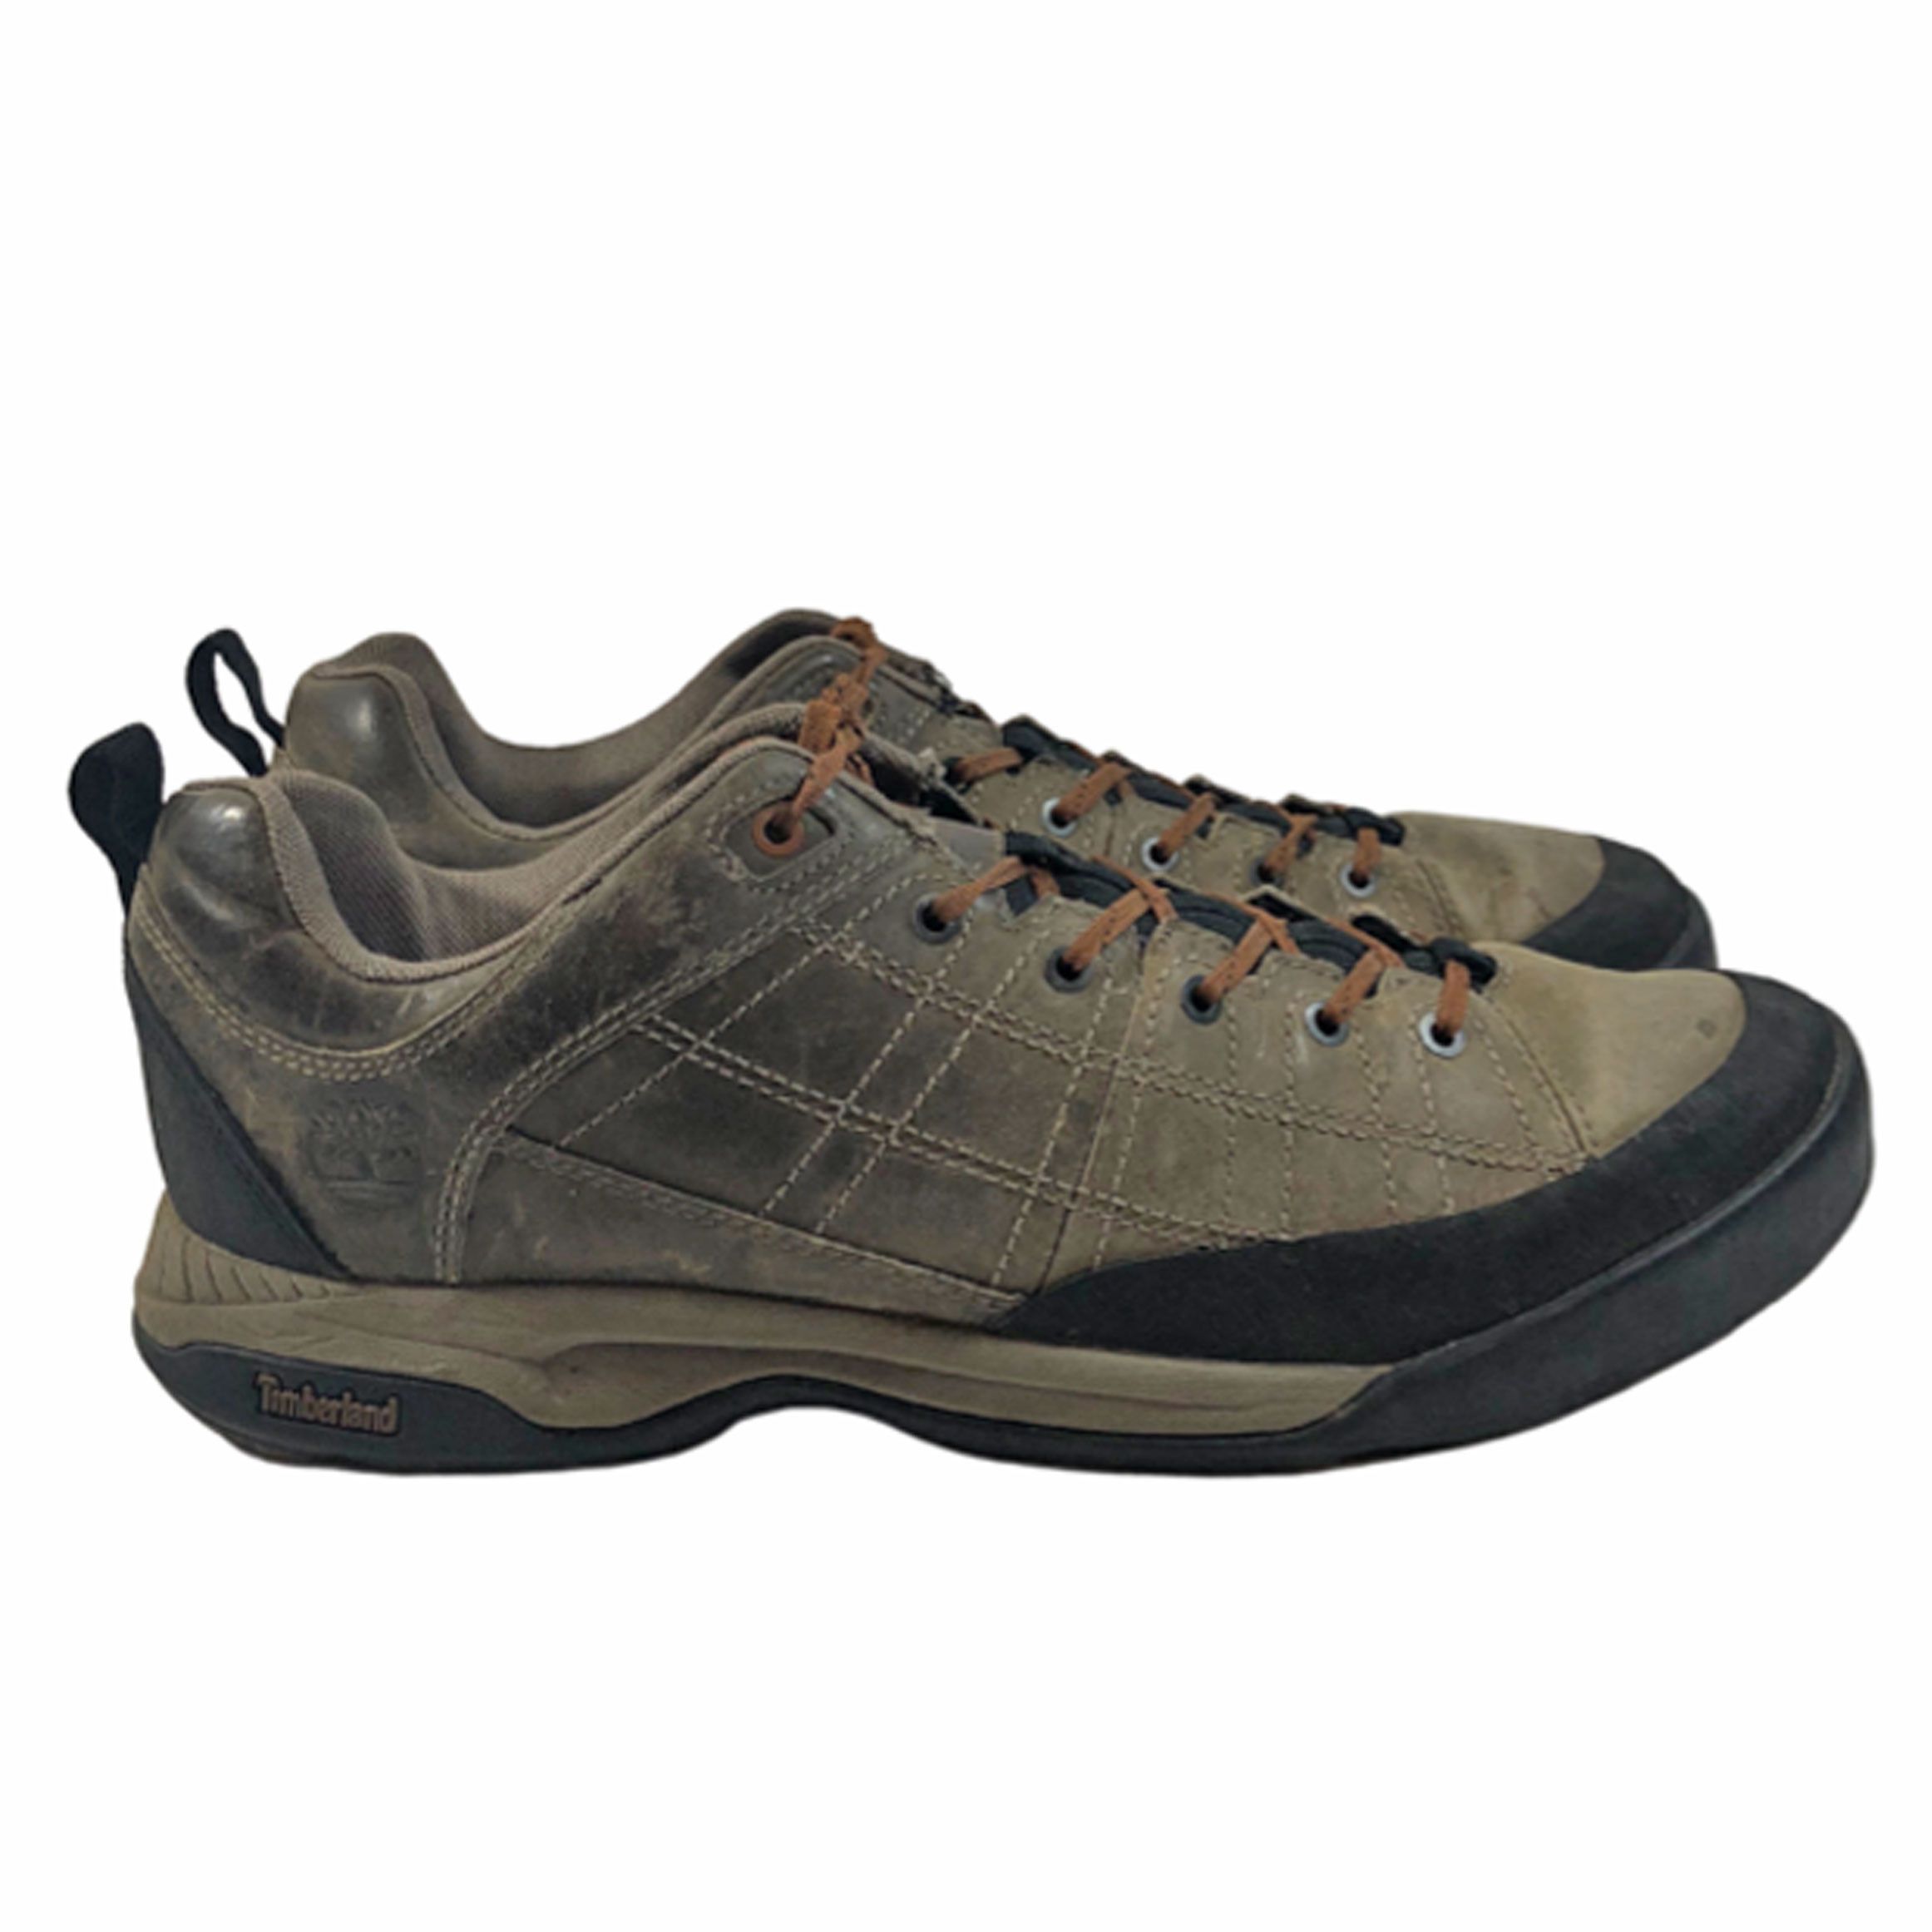 Timberland TIMBERLAND® Brown Low Top Brown Hiking Shoes Size 11.5 Size US 11.5 / EU 44-45 - 1 Preview